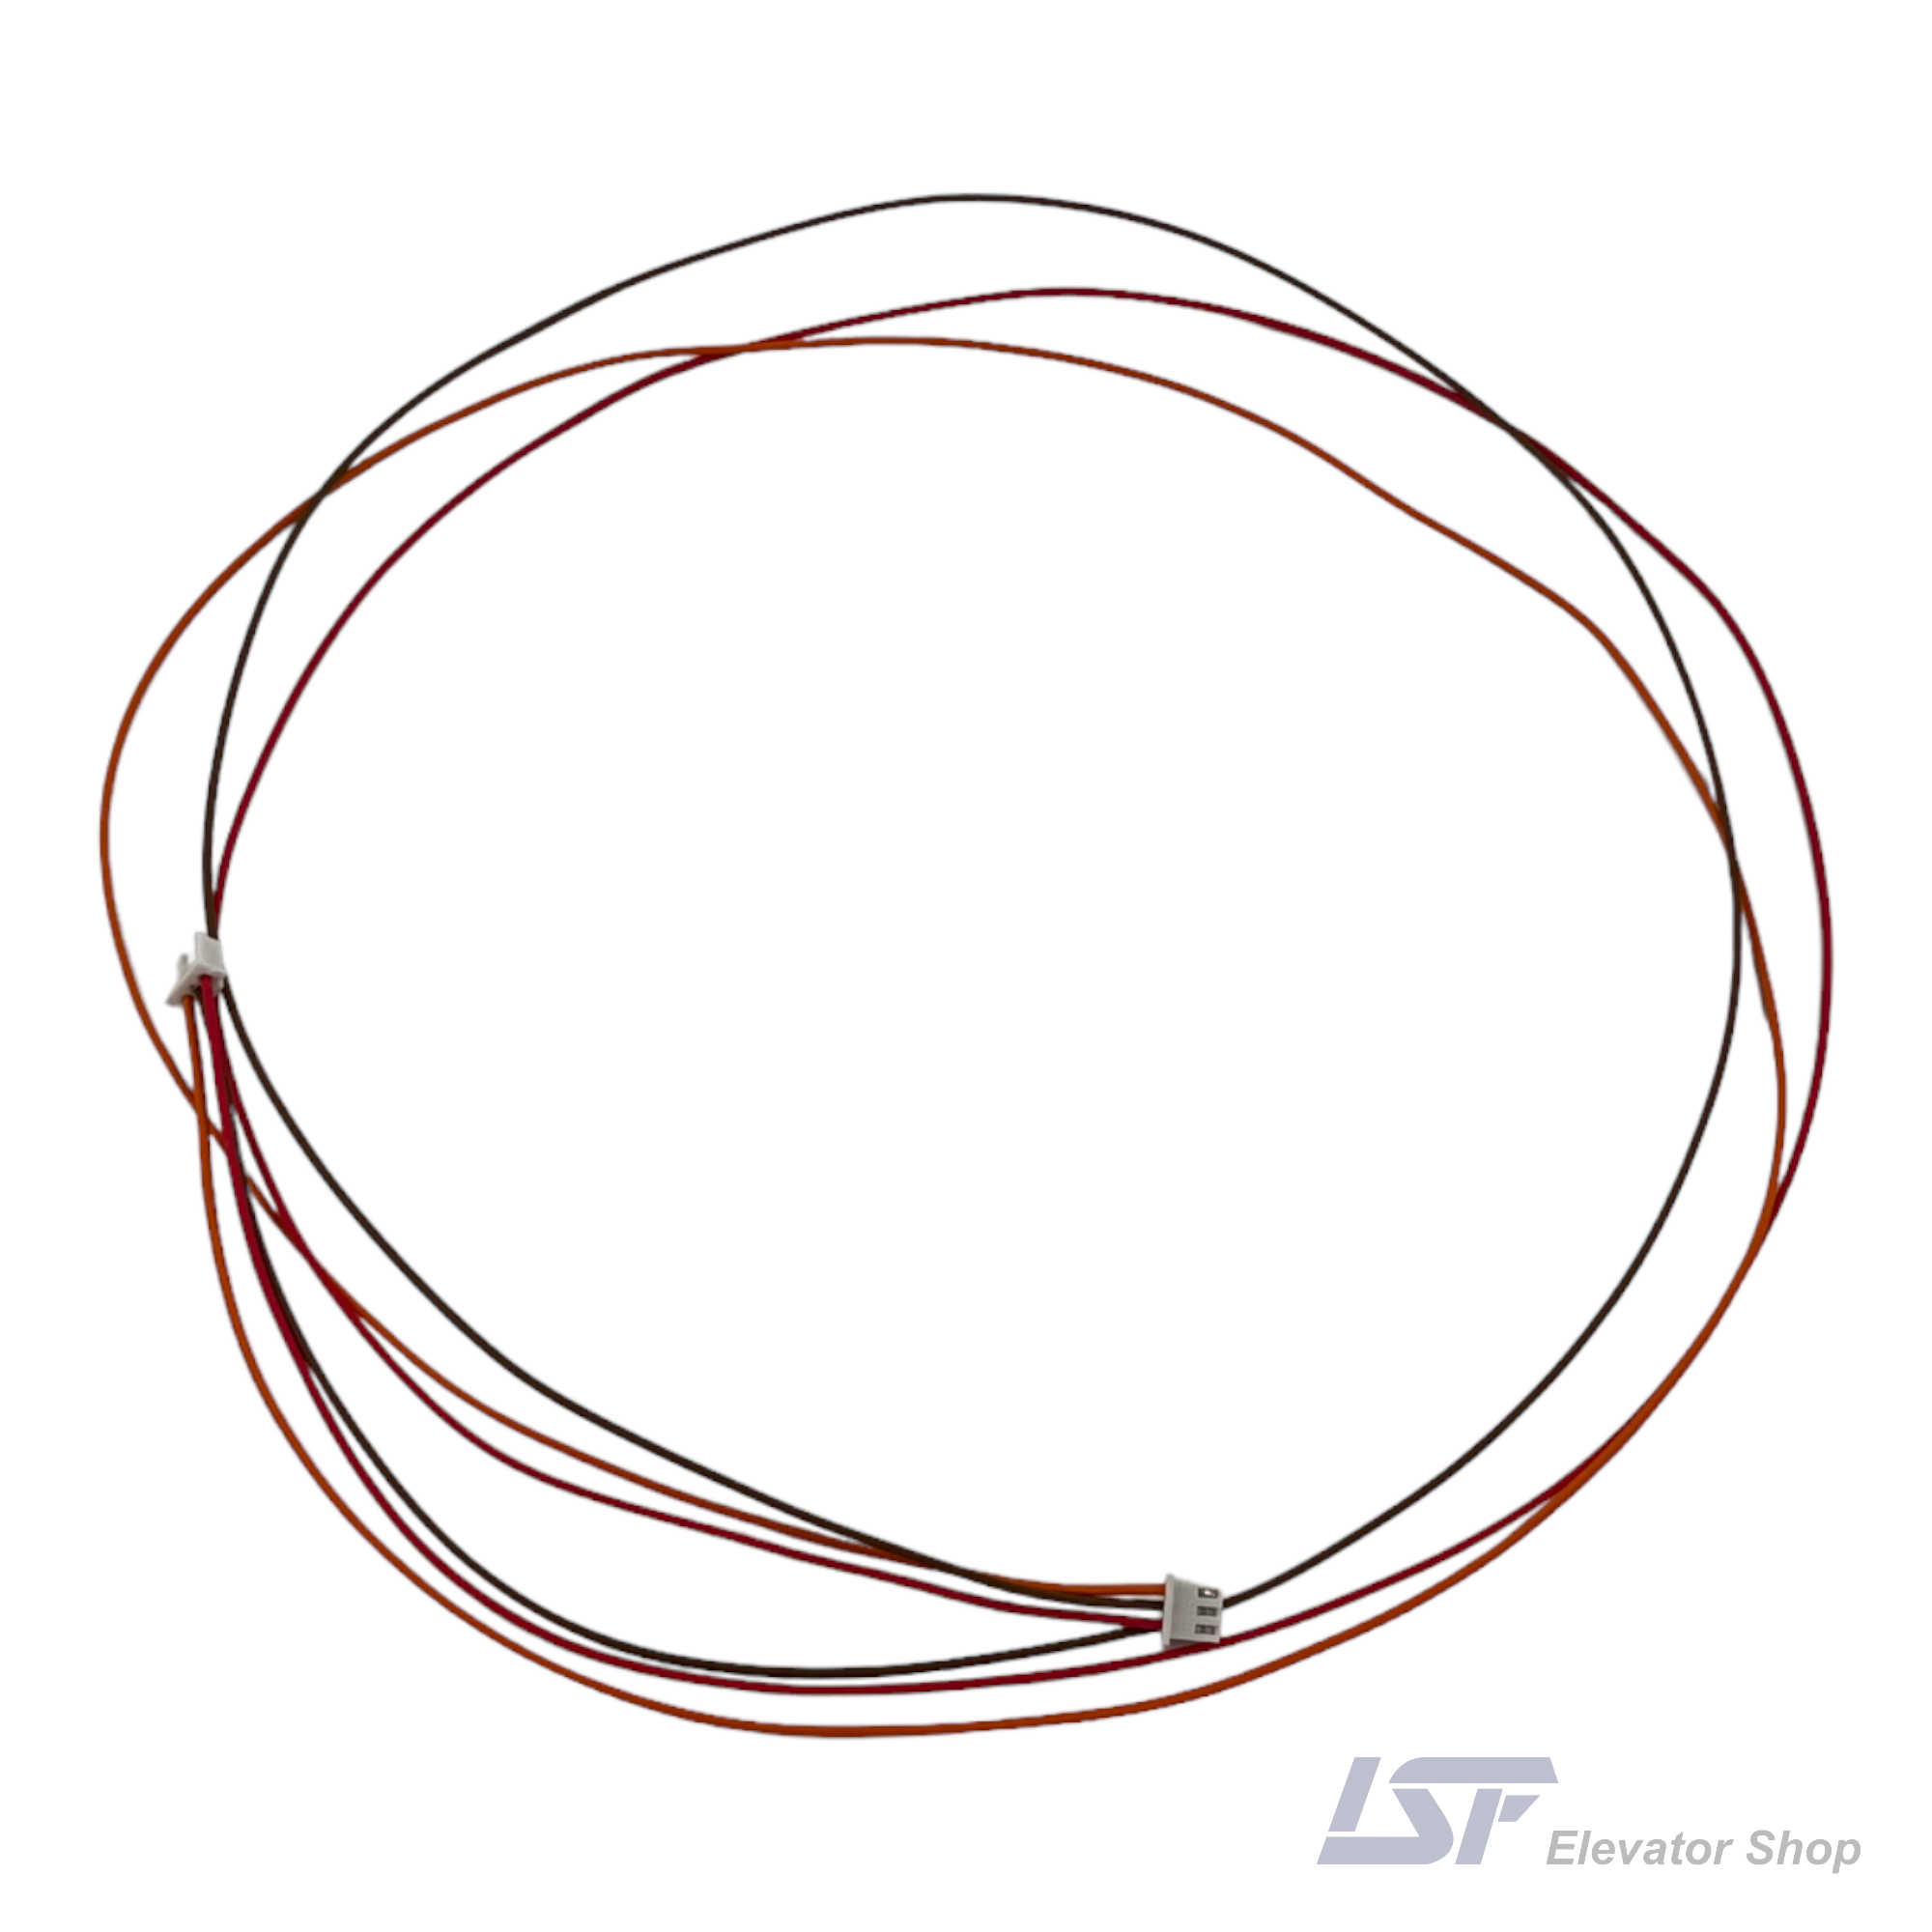 Arkel KBL-BT3 Button Cable 100 cm (Two End With Female Connectors)